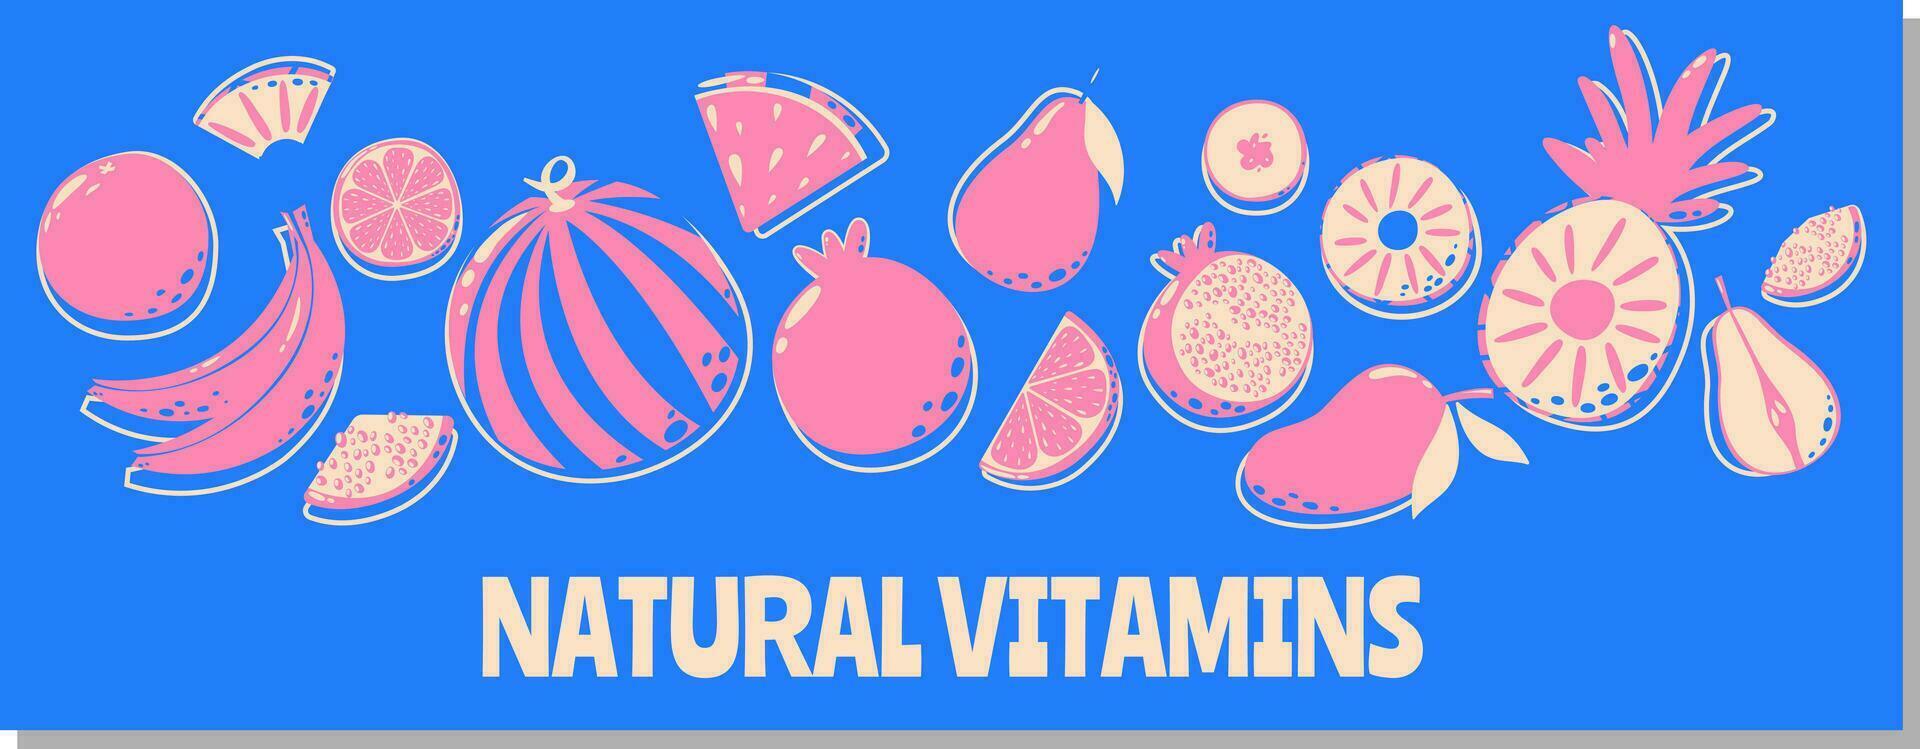 Bright fruit banner with text natural vitamins. Watermelon, pineapple, mango, orange and lemon, pear, bananas, pomegranate. For poster, flyer, fruit shop, social media vector